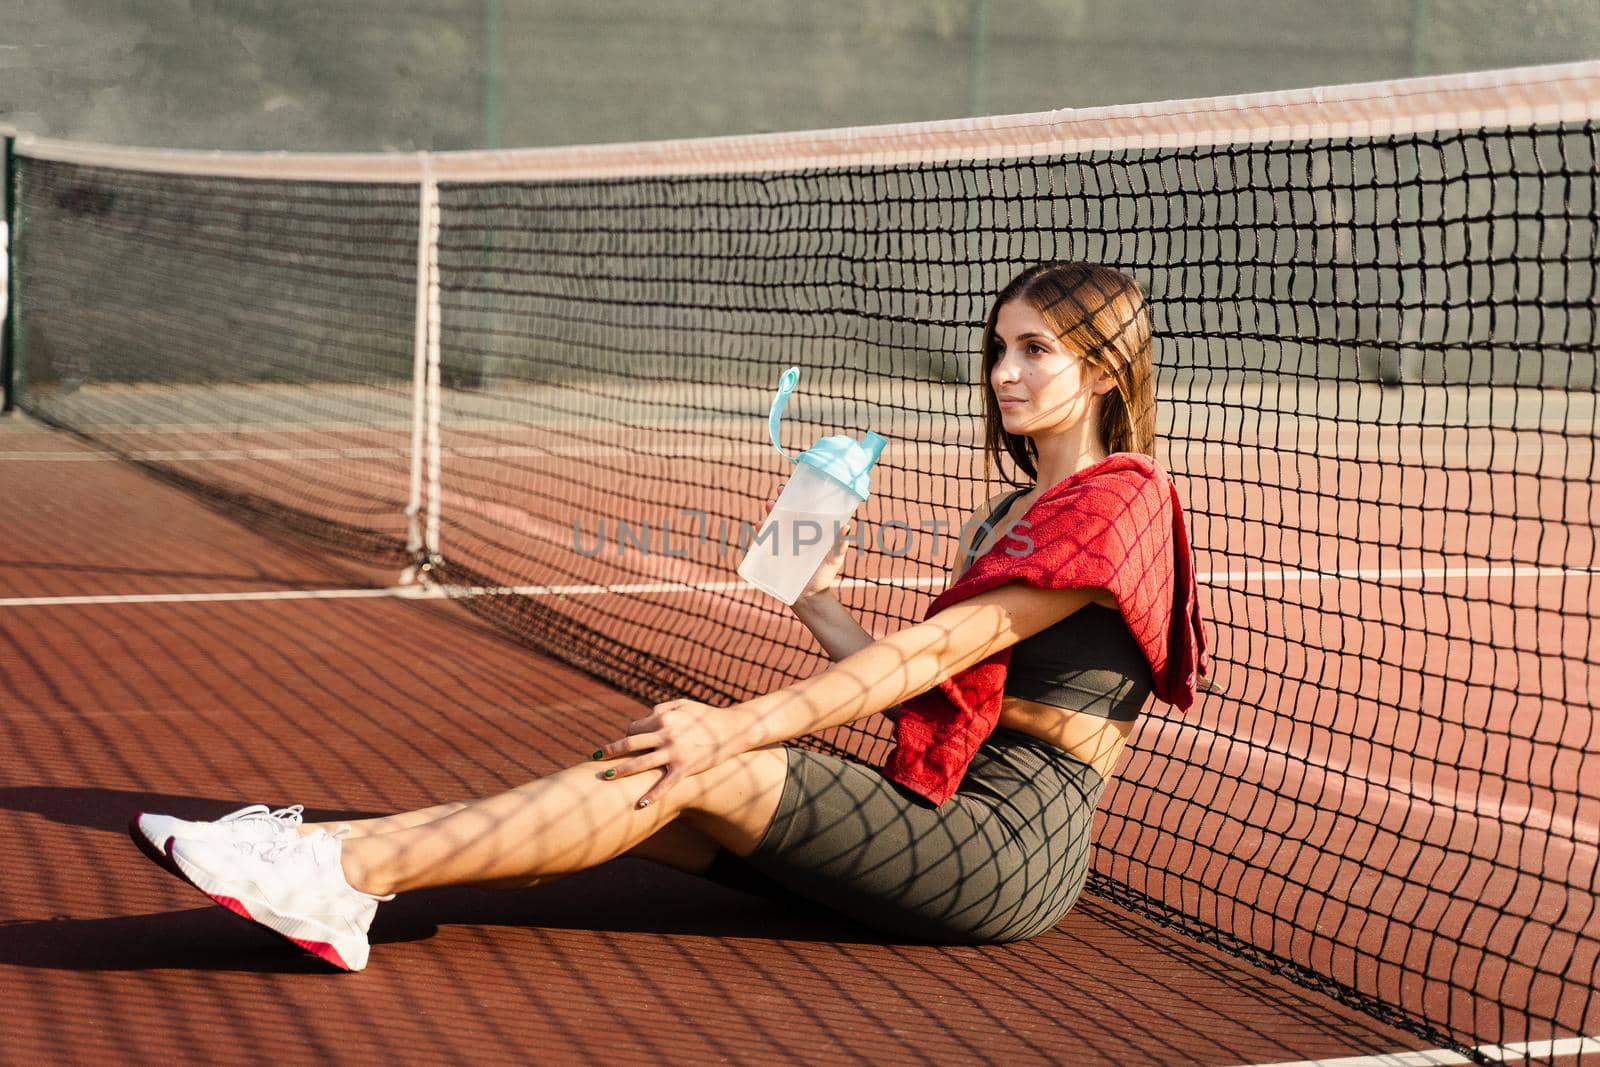 Athletic fit Asian girl drinking water from a bottle. Rest after training on the tennis court